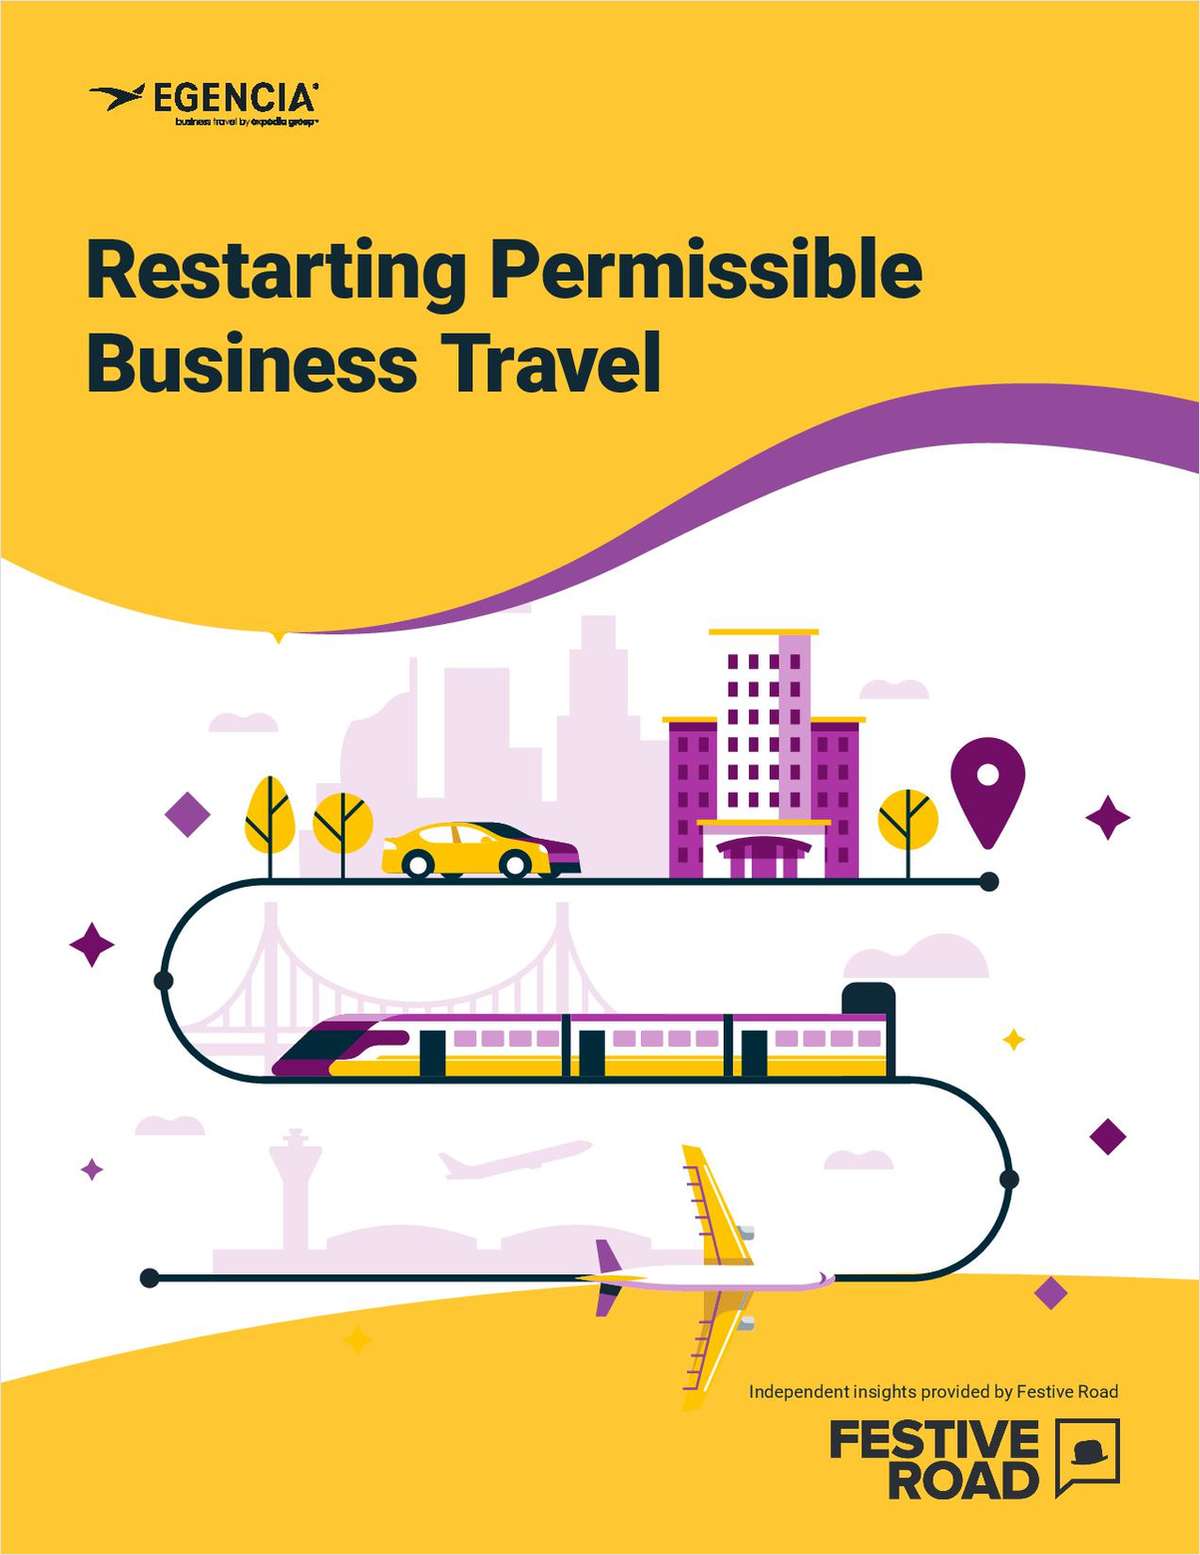 How to Restart Permissible Business Travel